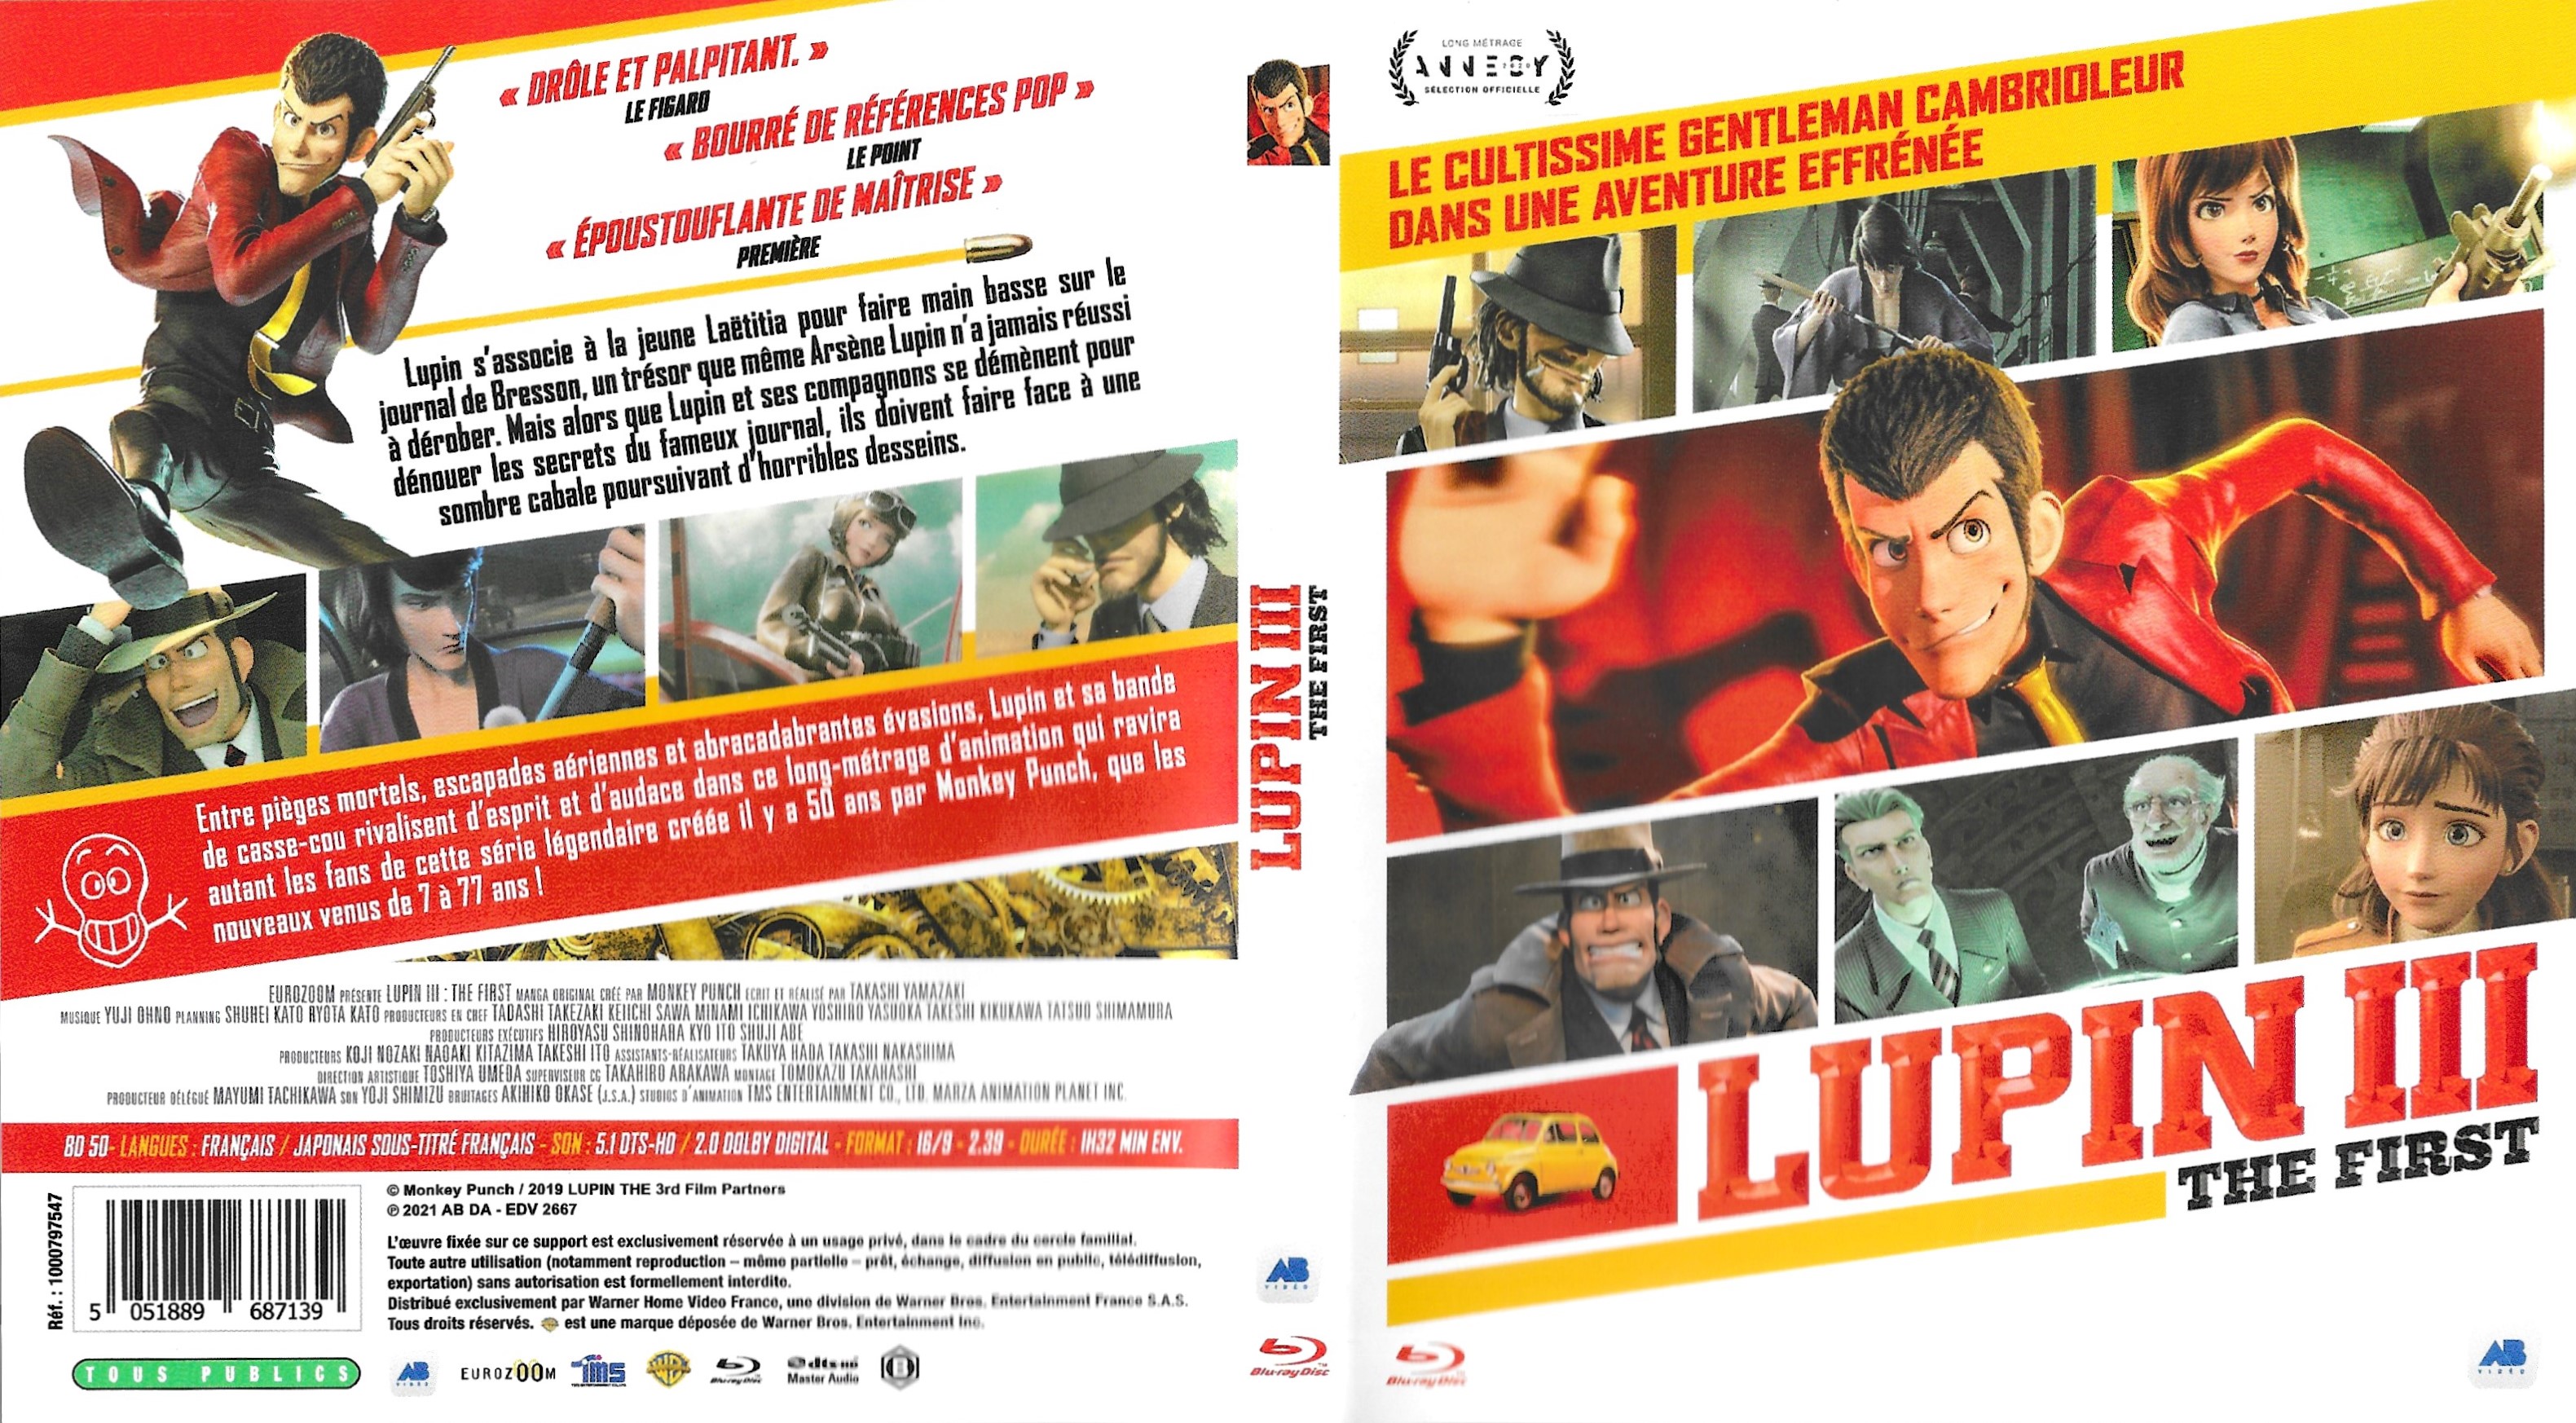 Jaquette DVD Lupin III the first (BLU-RAY)